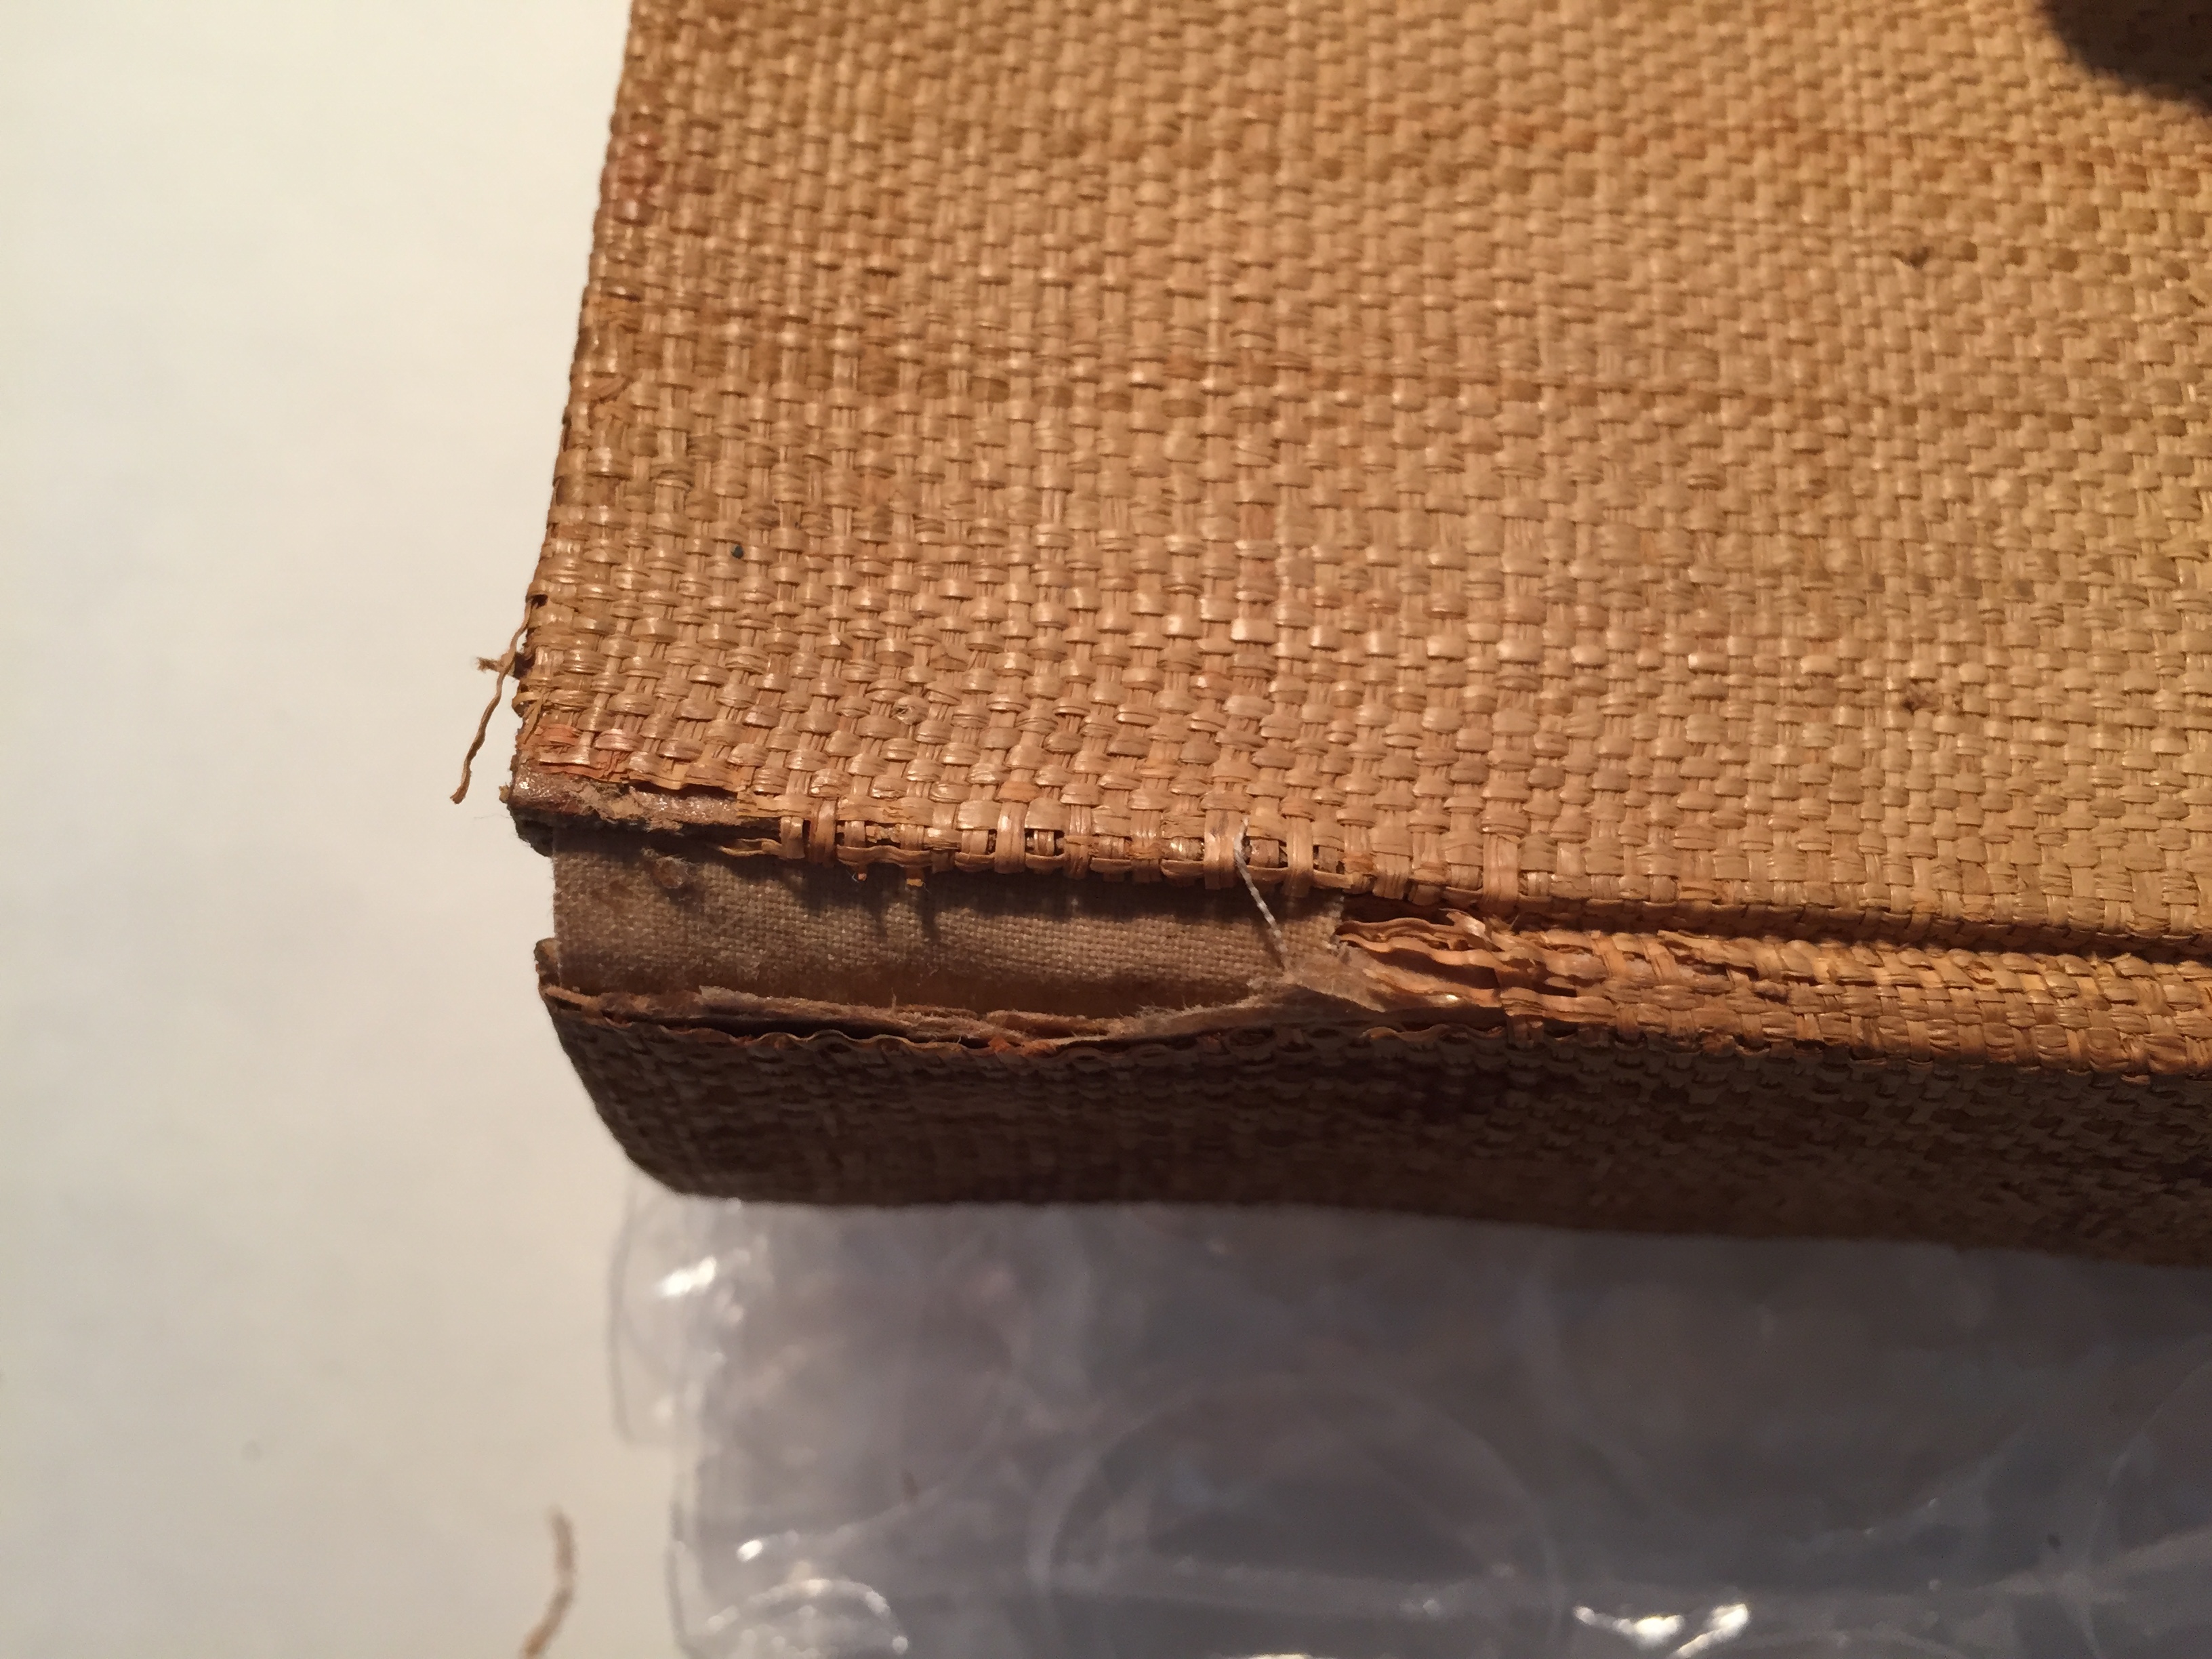 At the top of the spine a section of brown cloth in bridging a gap in the cover material.